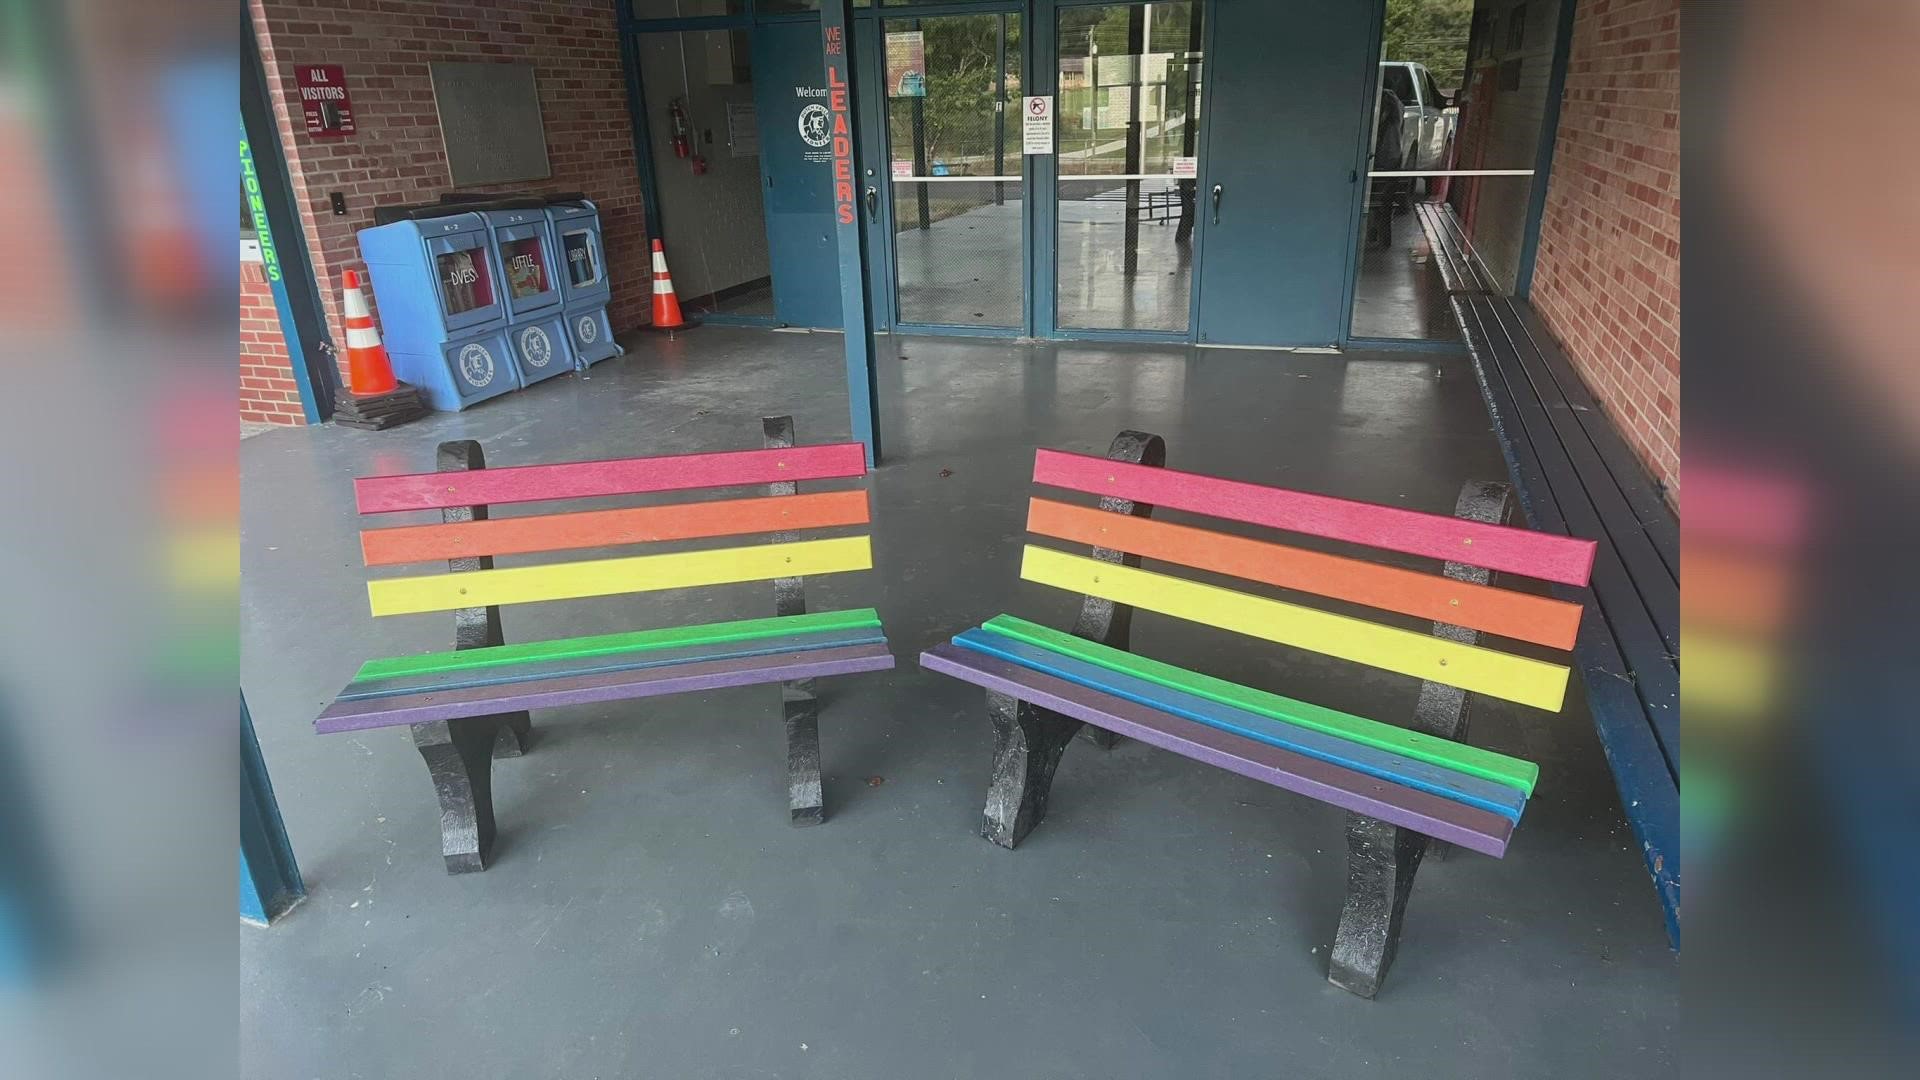 Dutch Valley Elementary School used recycled bottle caps to create colorful playground benches to encourage children to make friends.